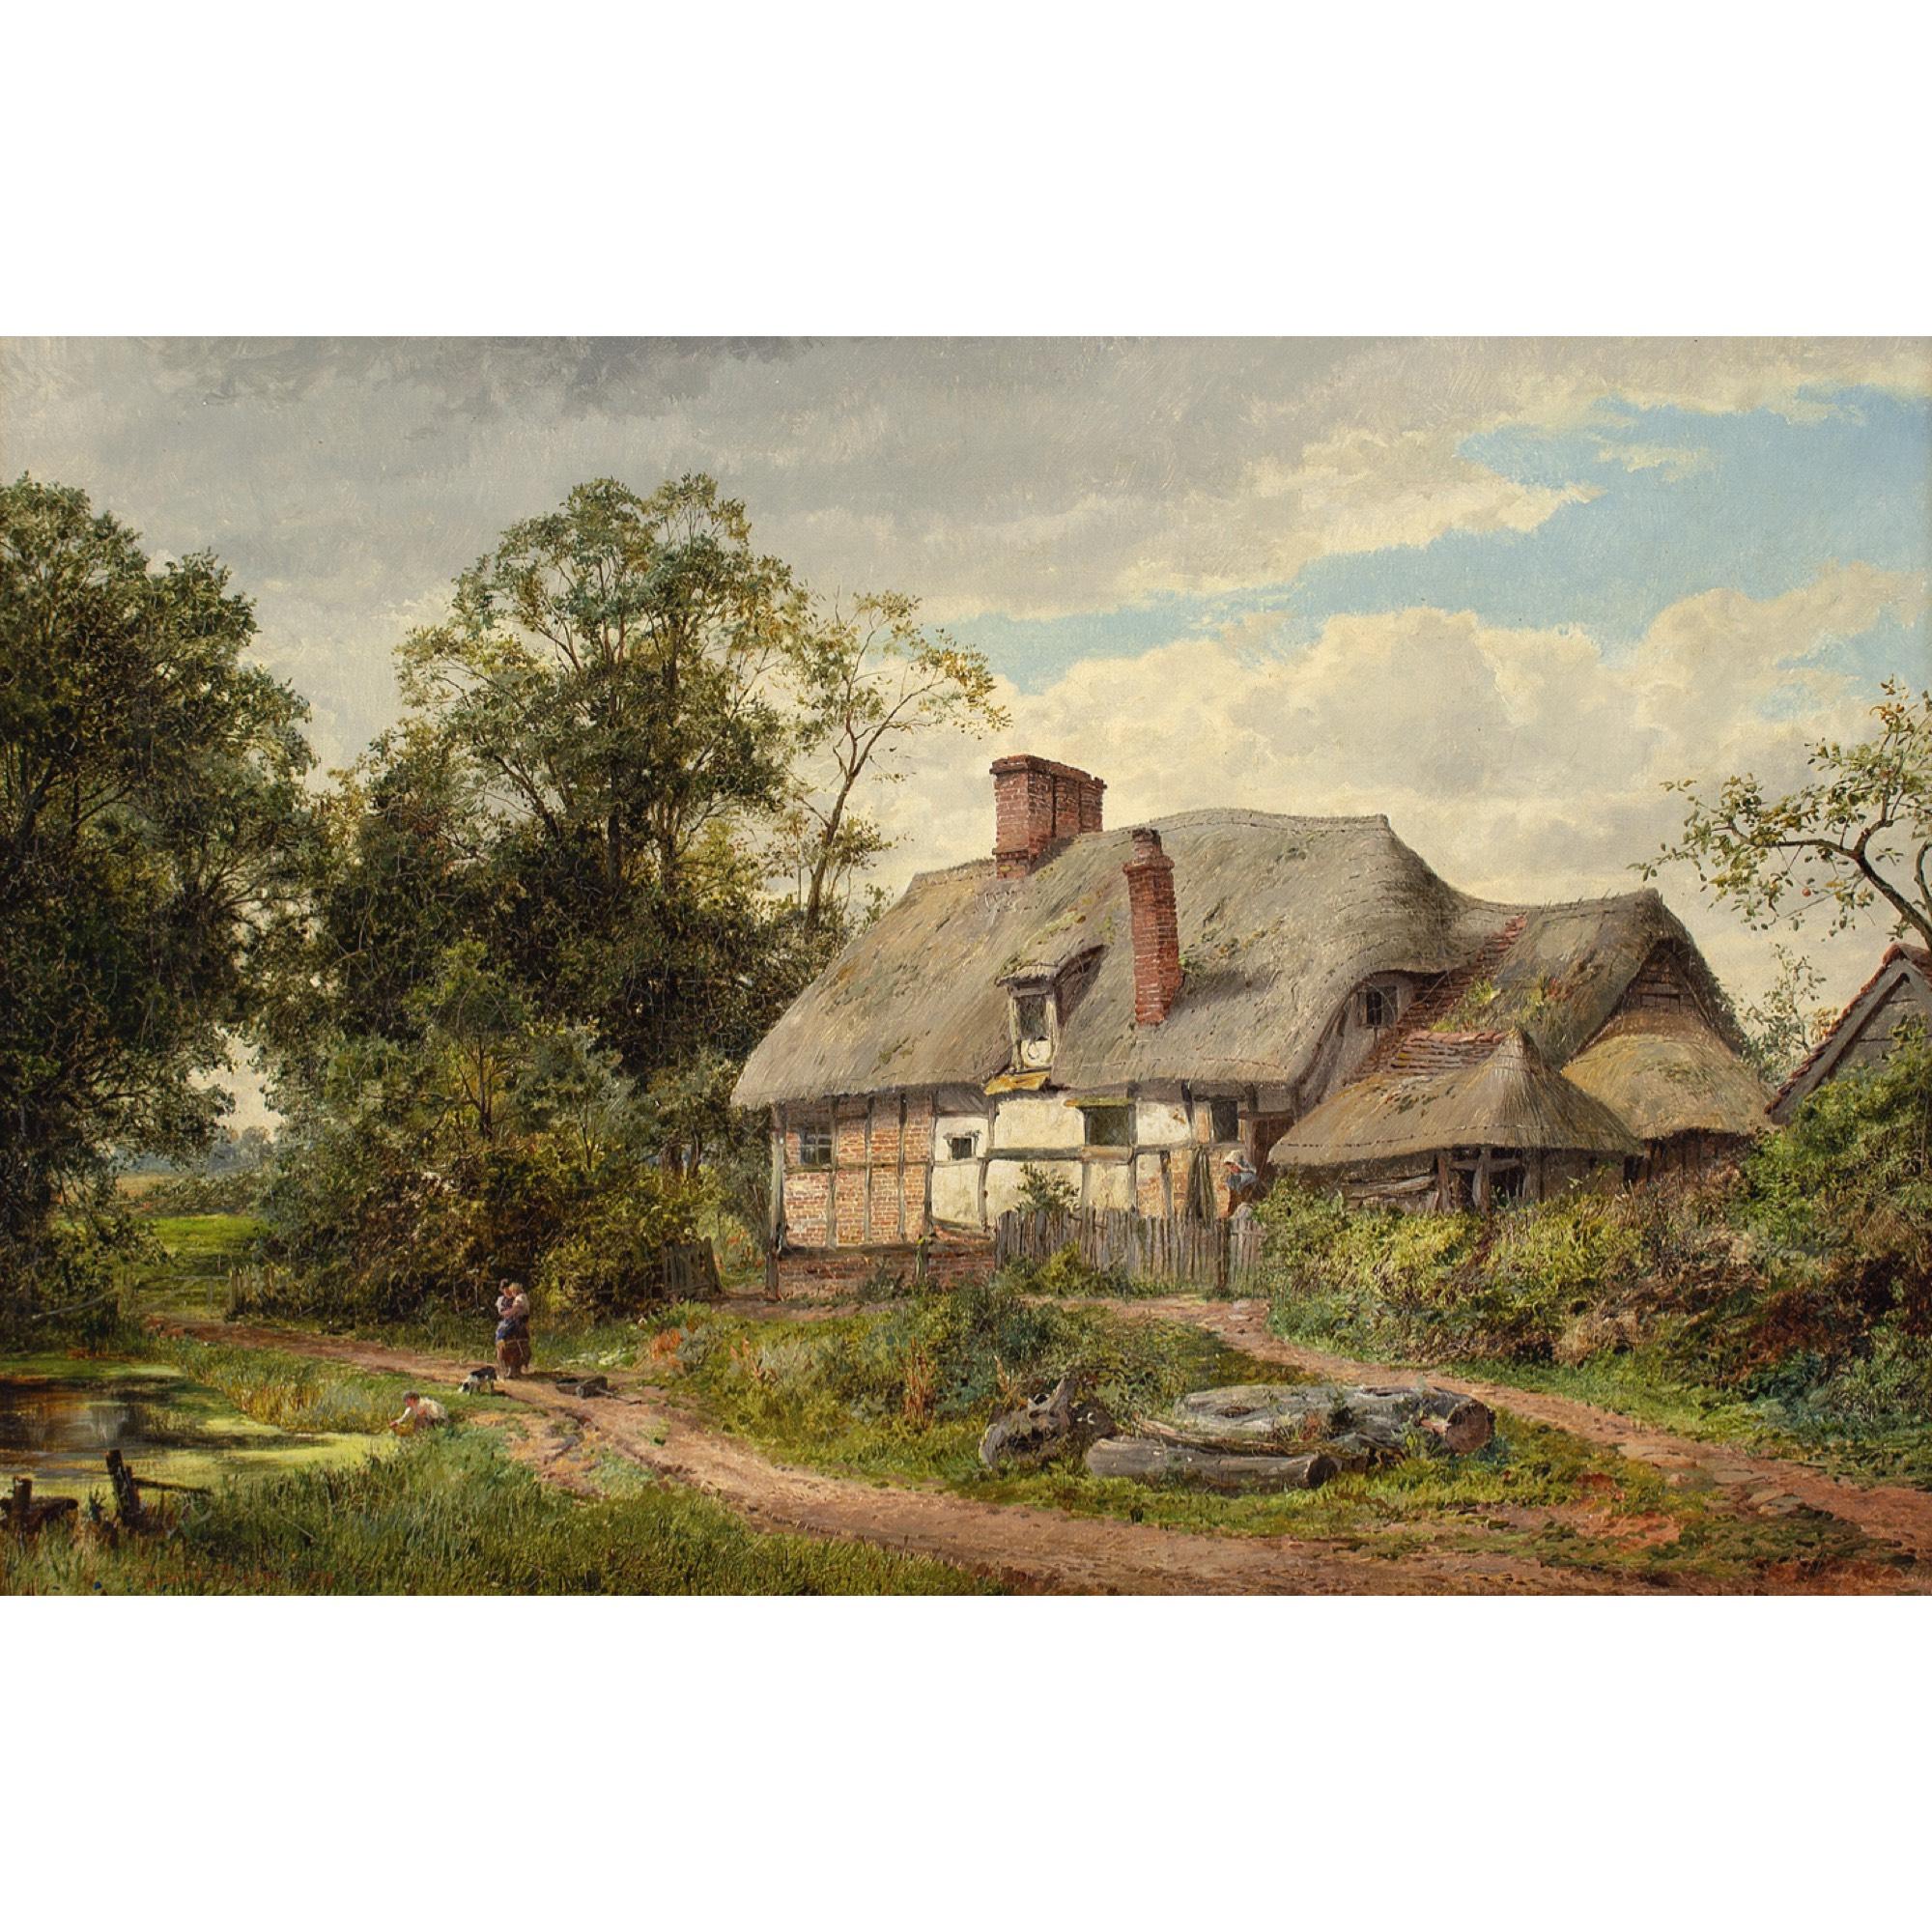 David Bates, Rural Landscape With Thatched Cottage, Country Track & Pond - Painting by David Bates b.1840